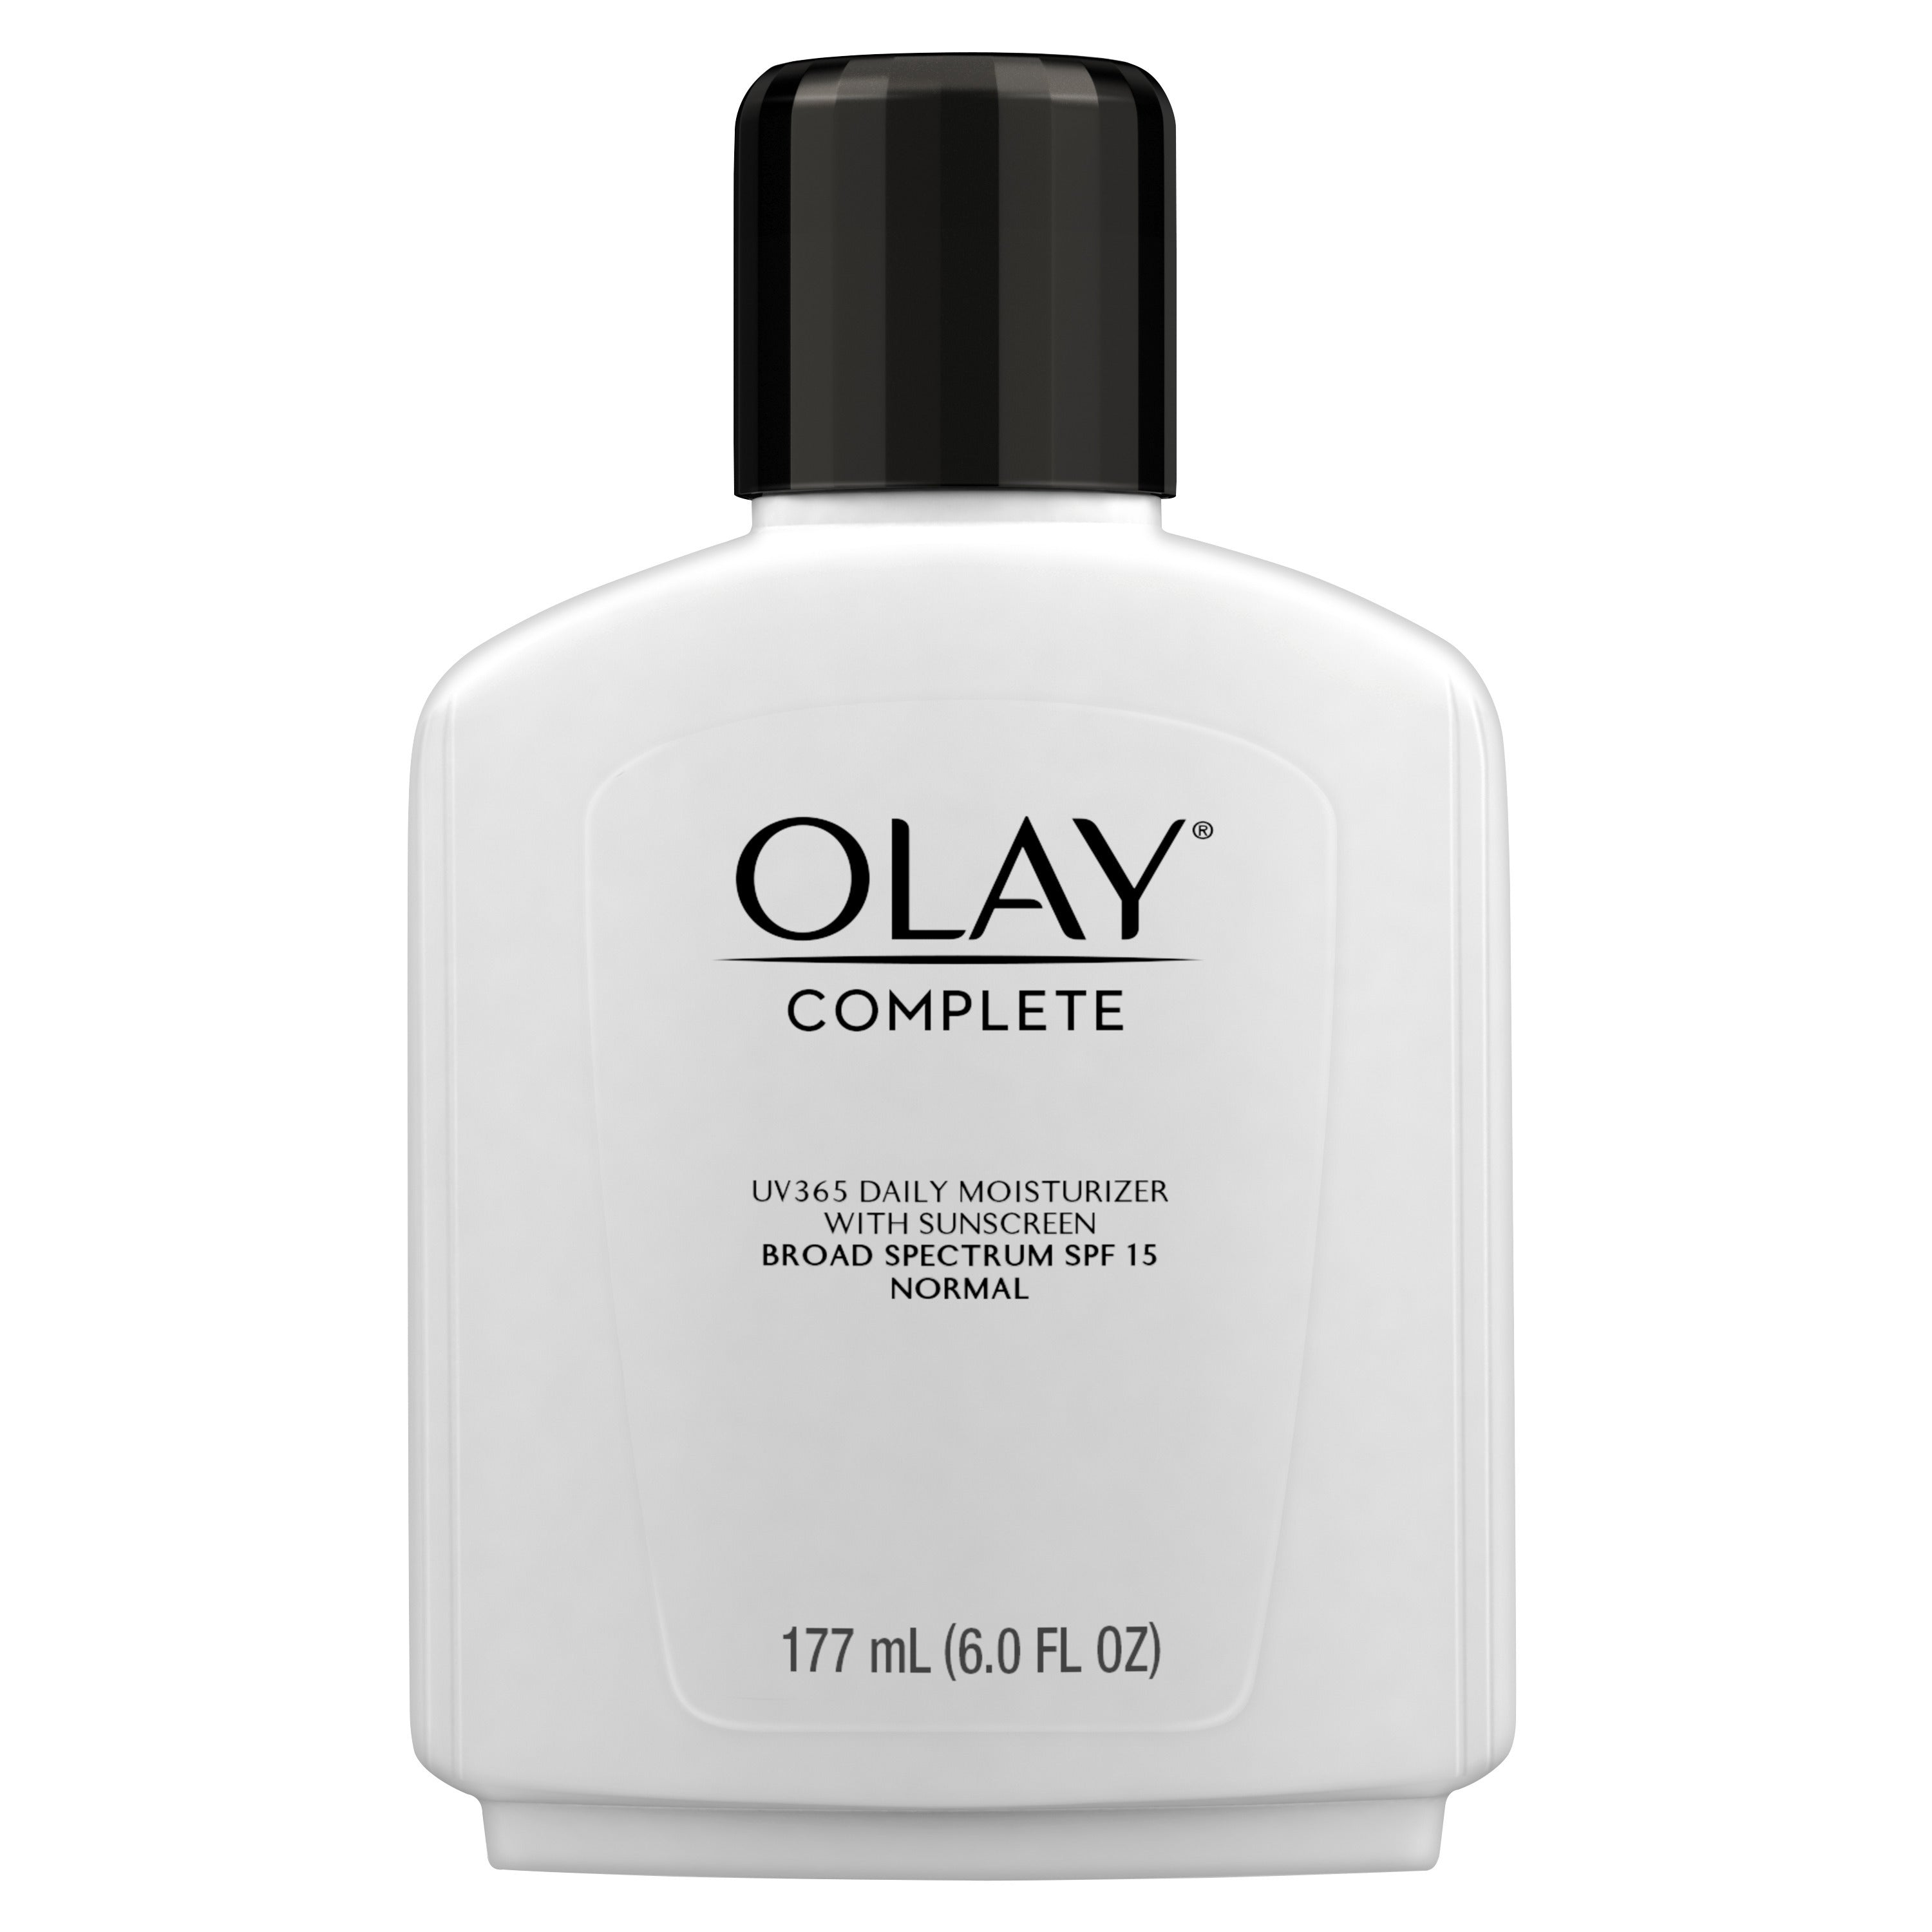 Olay Complete Lotion Moisturizer with SPF 15 Sun Protection for Normal Skin, 6.0 fl oz | MTTS316